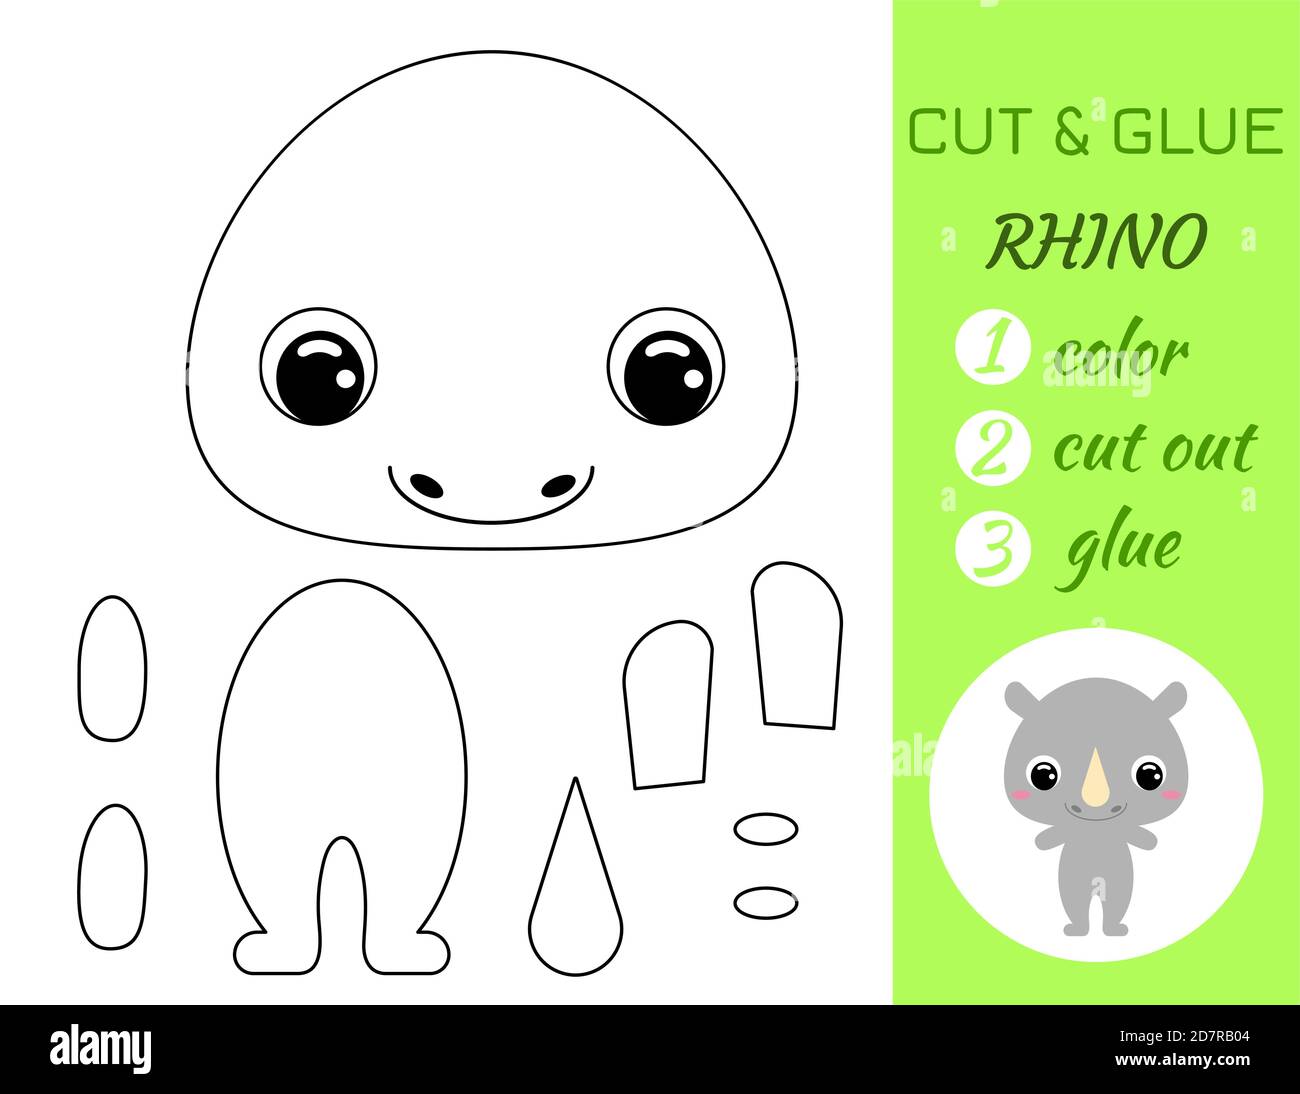 Coloring book cut and glue baby rhino. Educational paper game for preschool children. Cut and Paste Worksheet. Color, cut parts and glue on paper.Cart Stock Vector